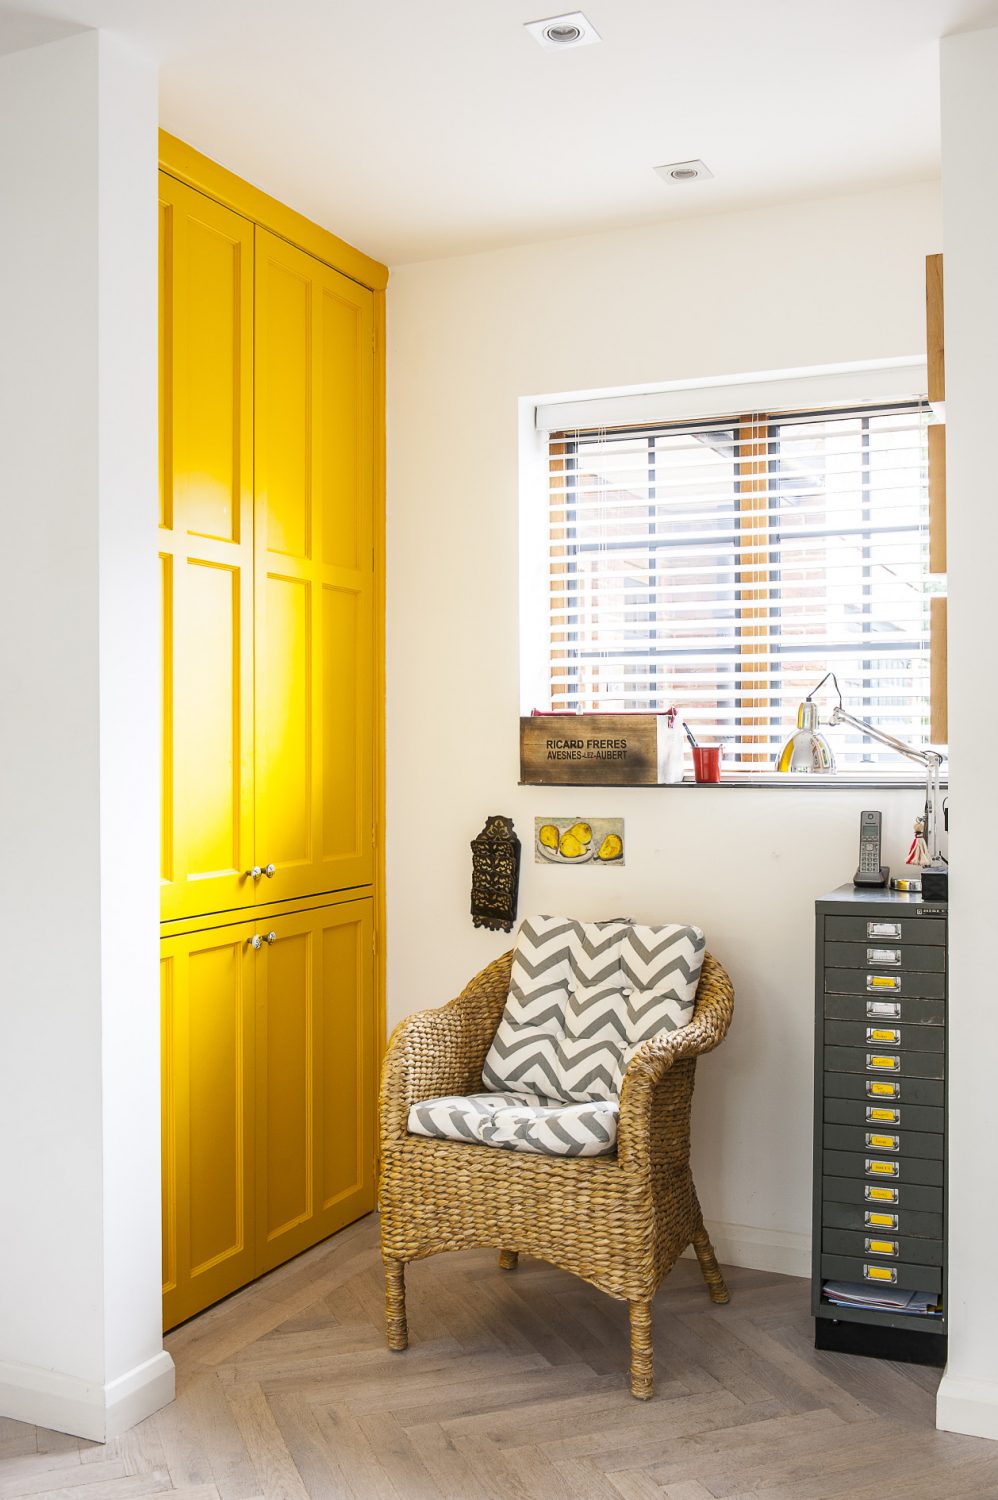 The ‘simple yellow’ of the Tesco bar stools in the kitchen is echoed by lamps in the living room and the painted doors of a downstairs storage cupboard.